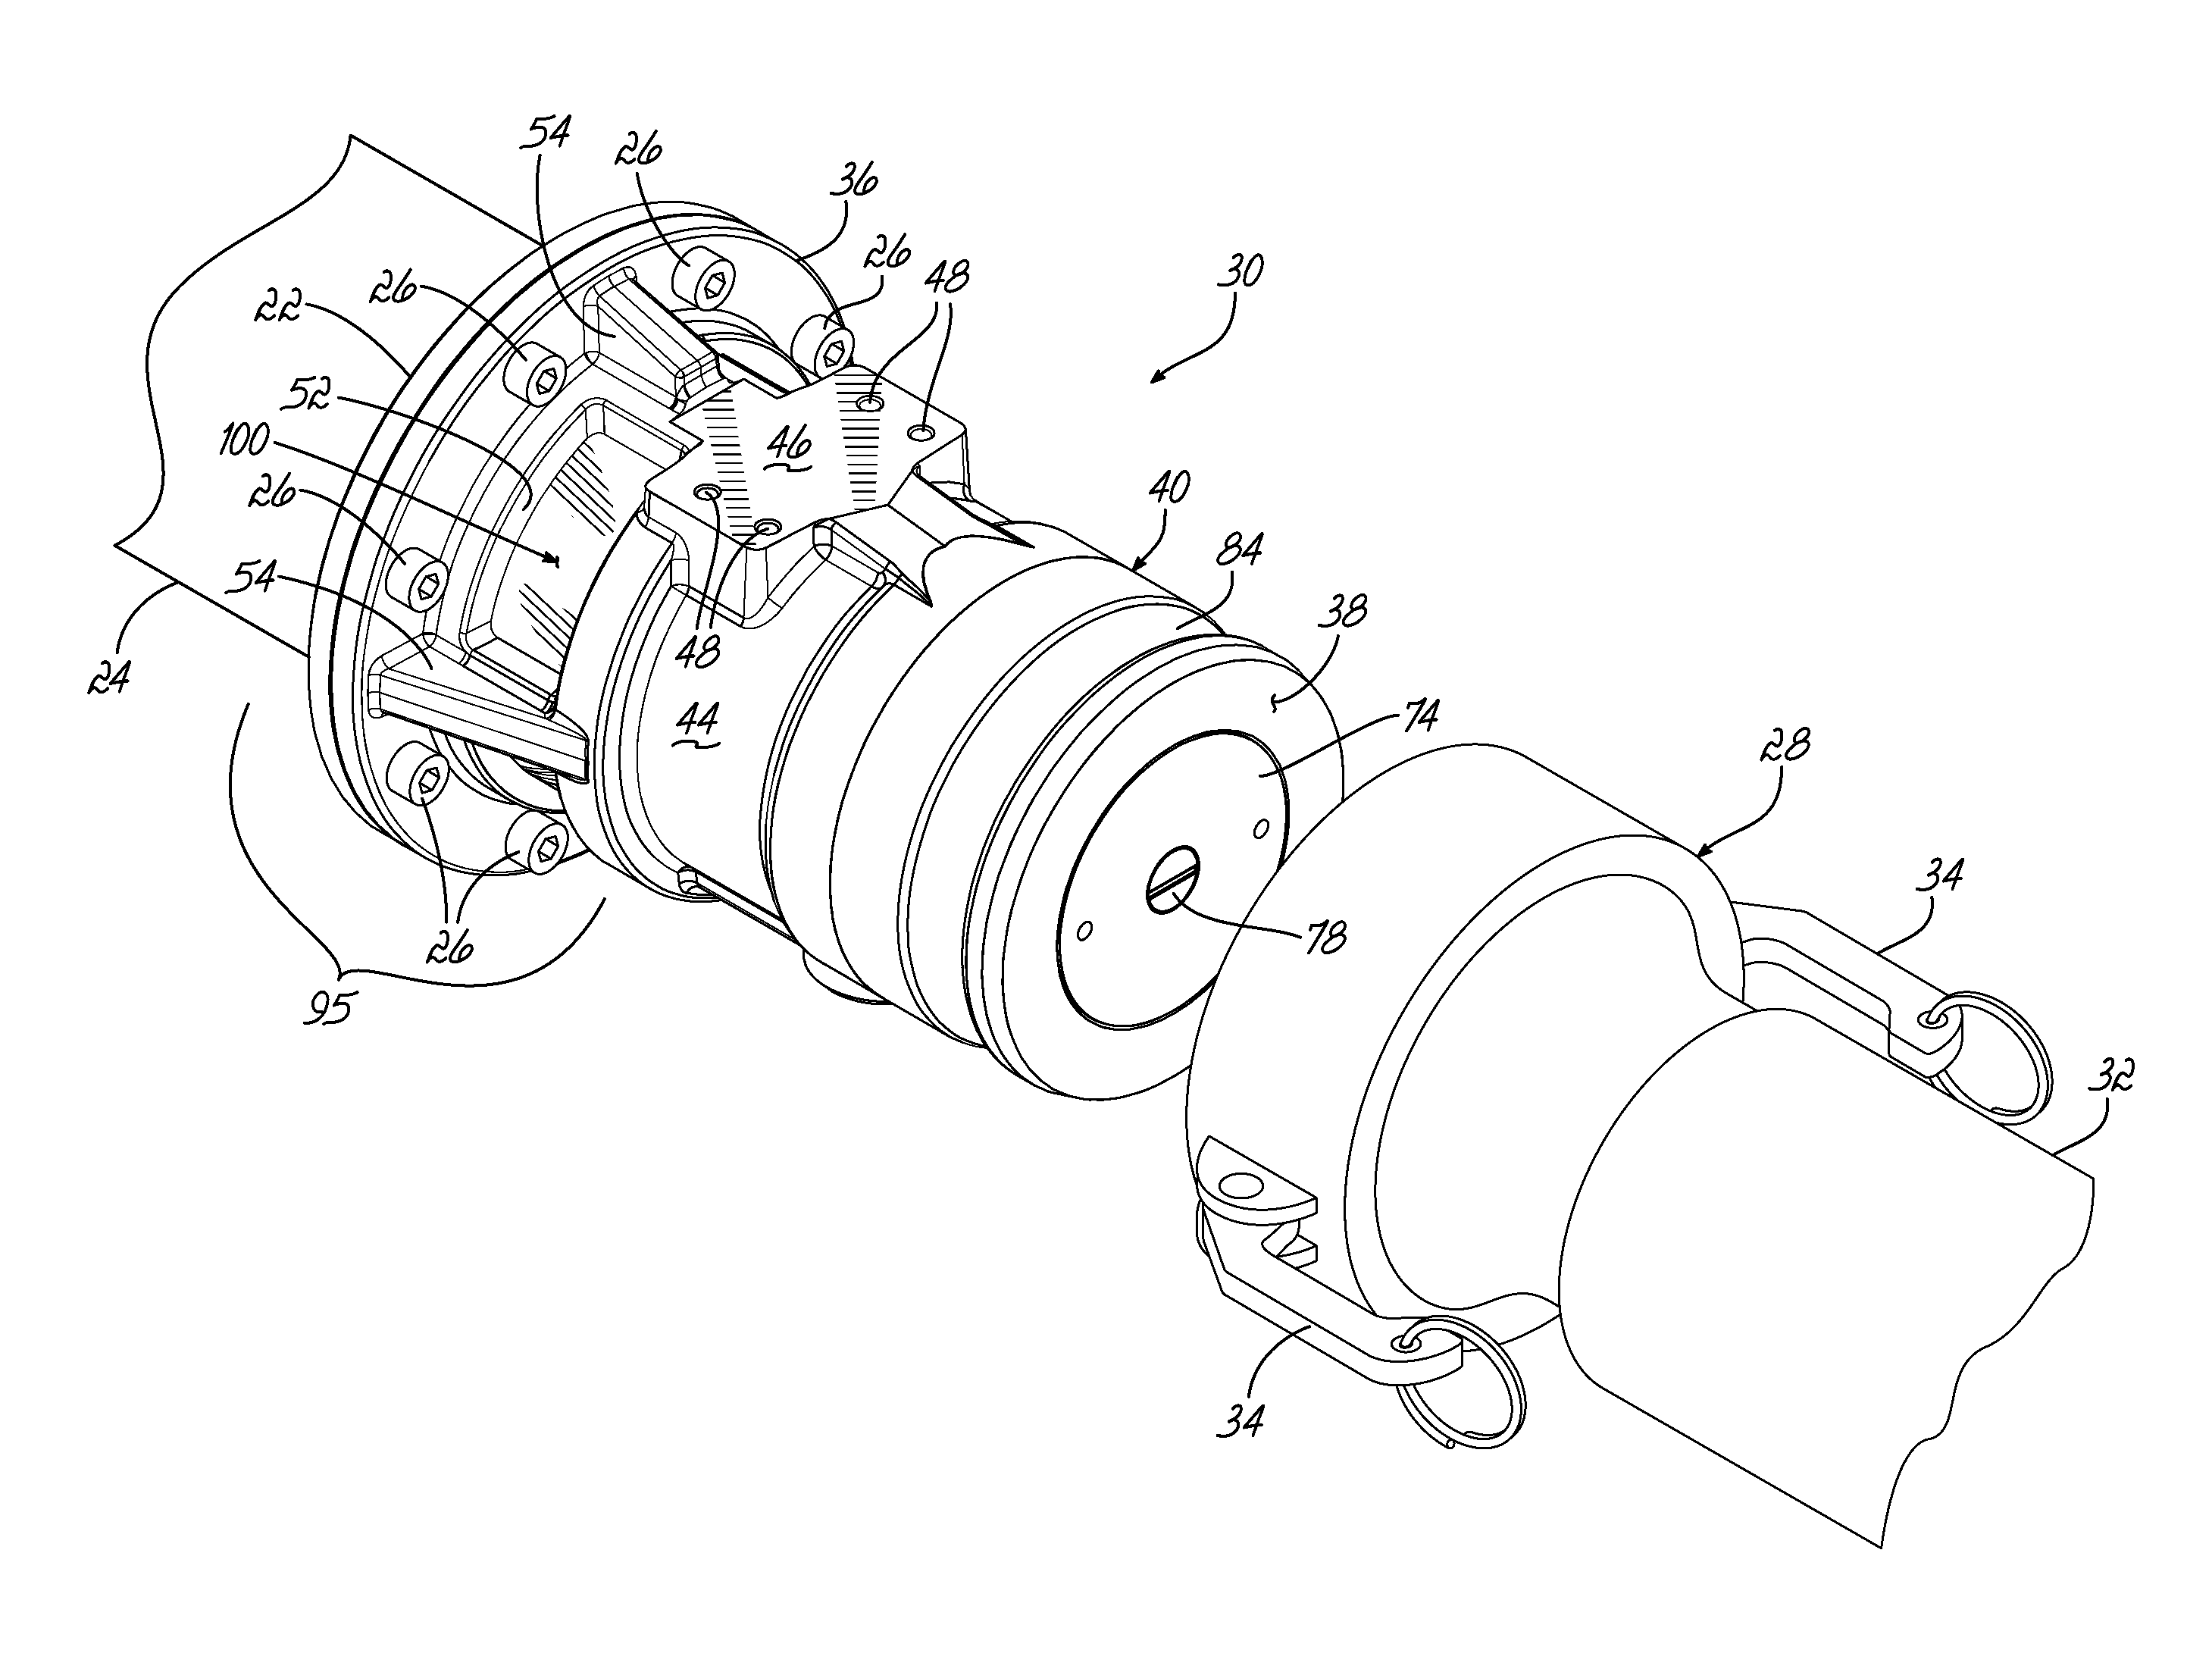 Poppet Valve Assembly With In-Line Sight Glass